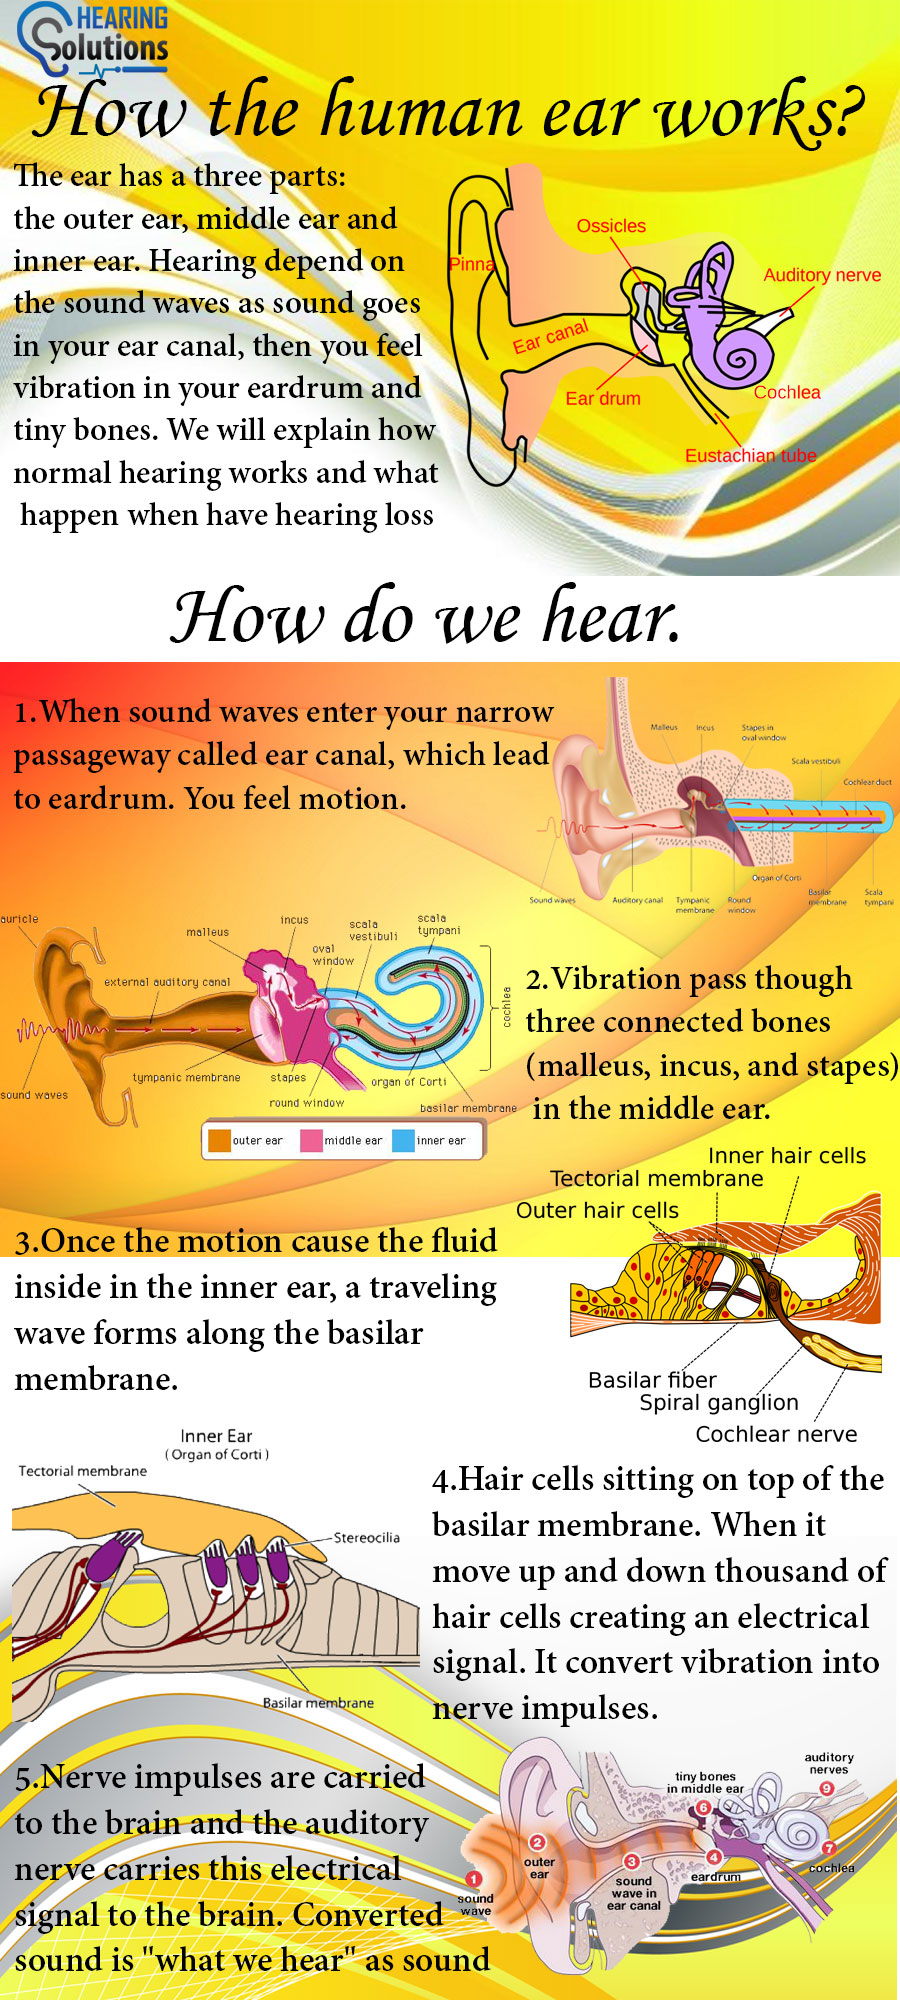 the ear is a key organ for the our body which is help to hearing sound . hearing depend on the sound waves enter the ear canal and vibrate the tinny bones in the ear against the tympanic membrane.